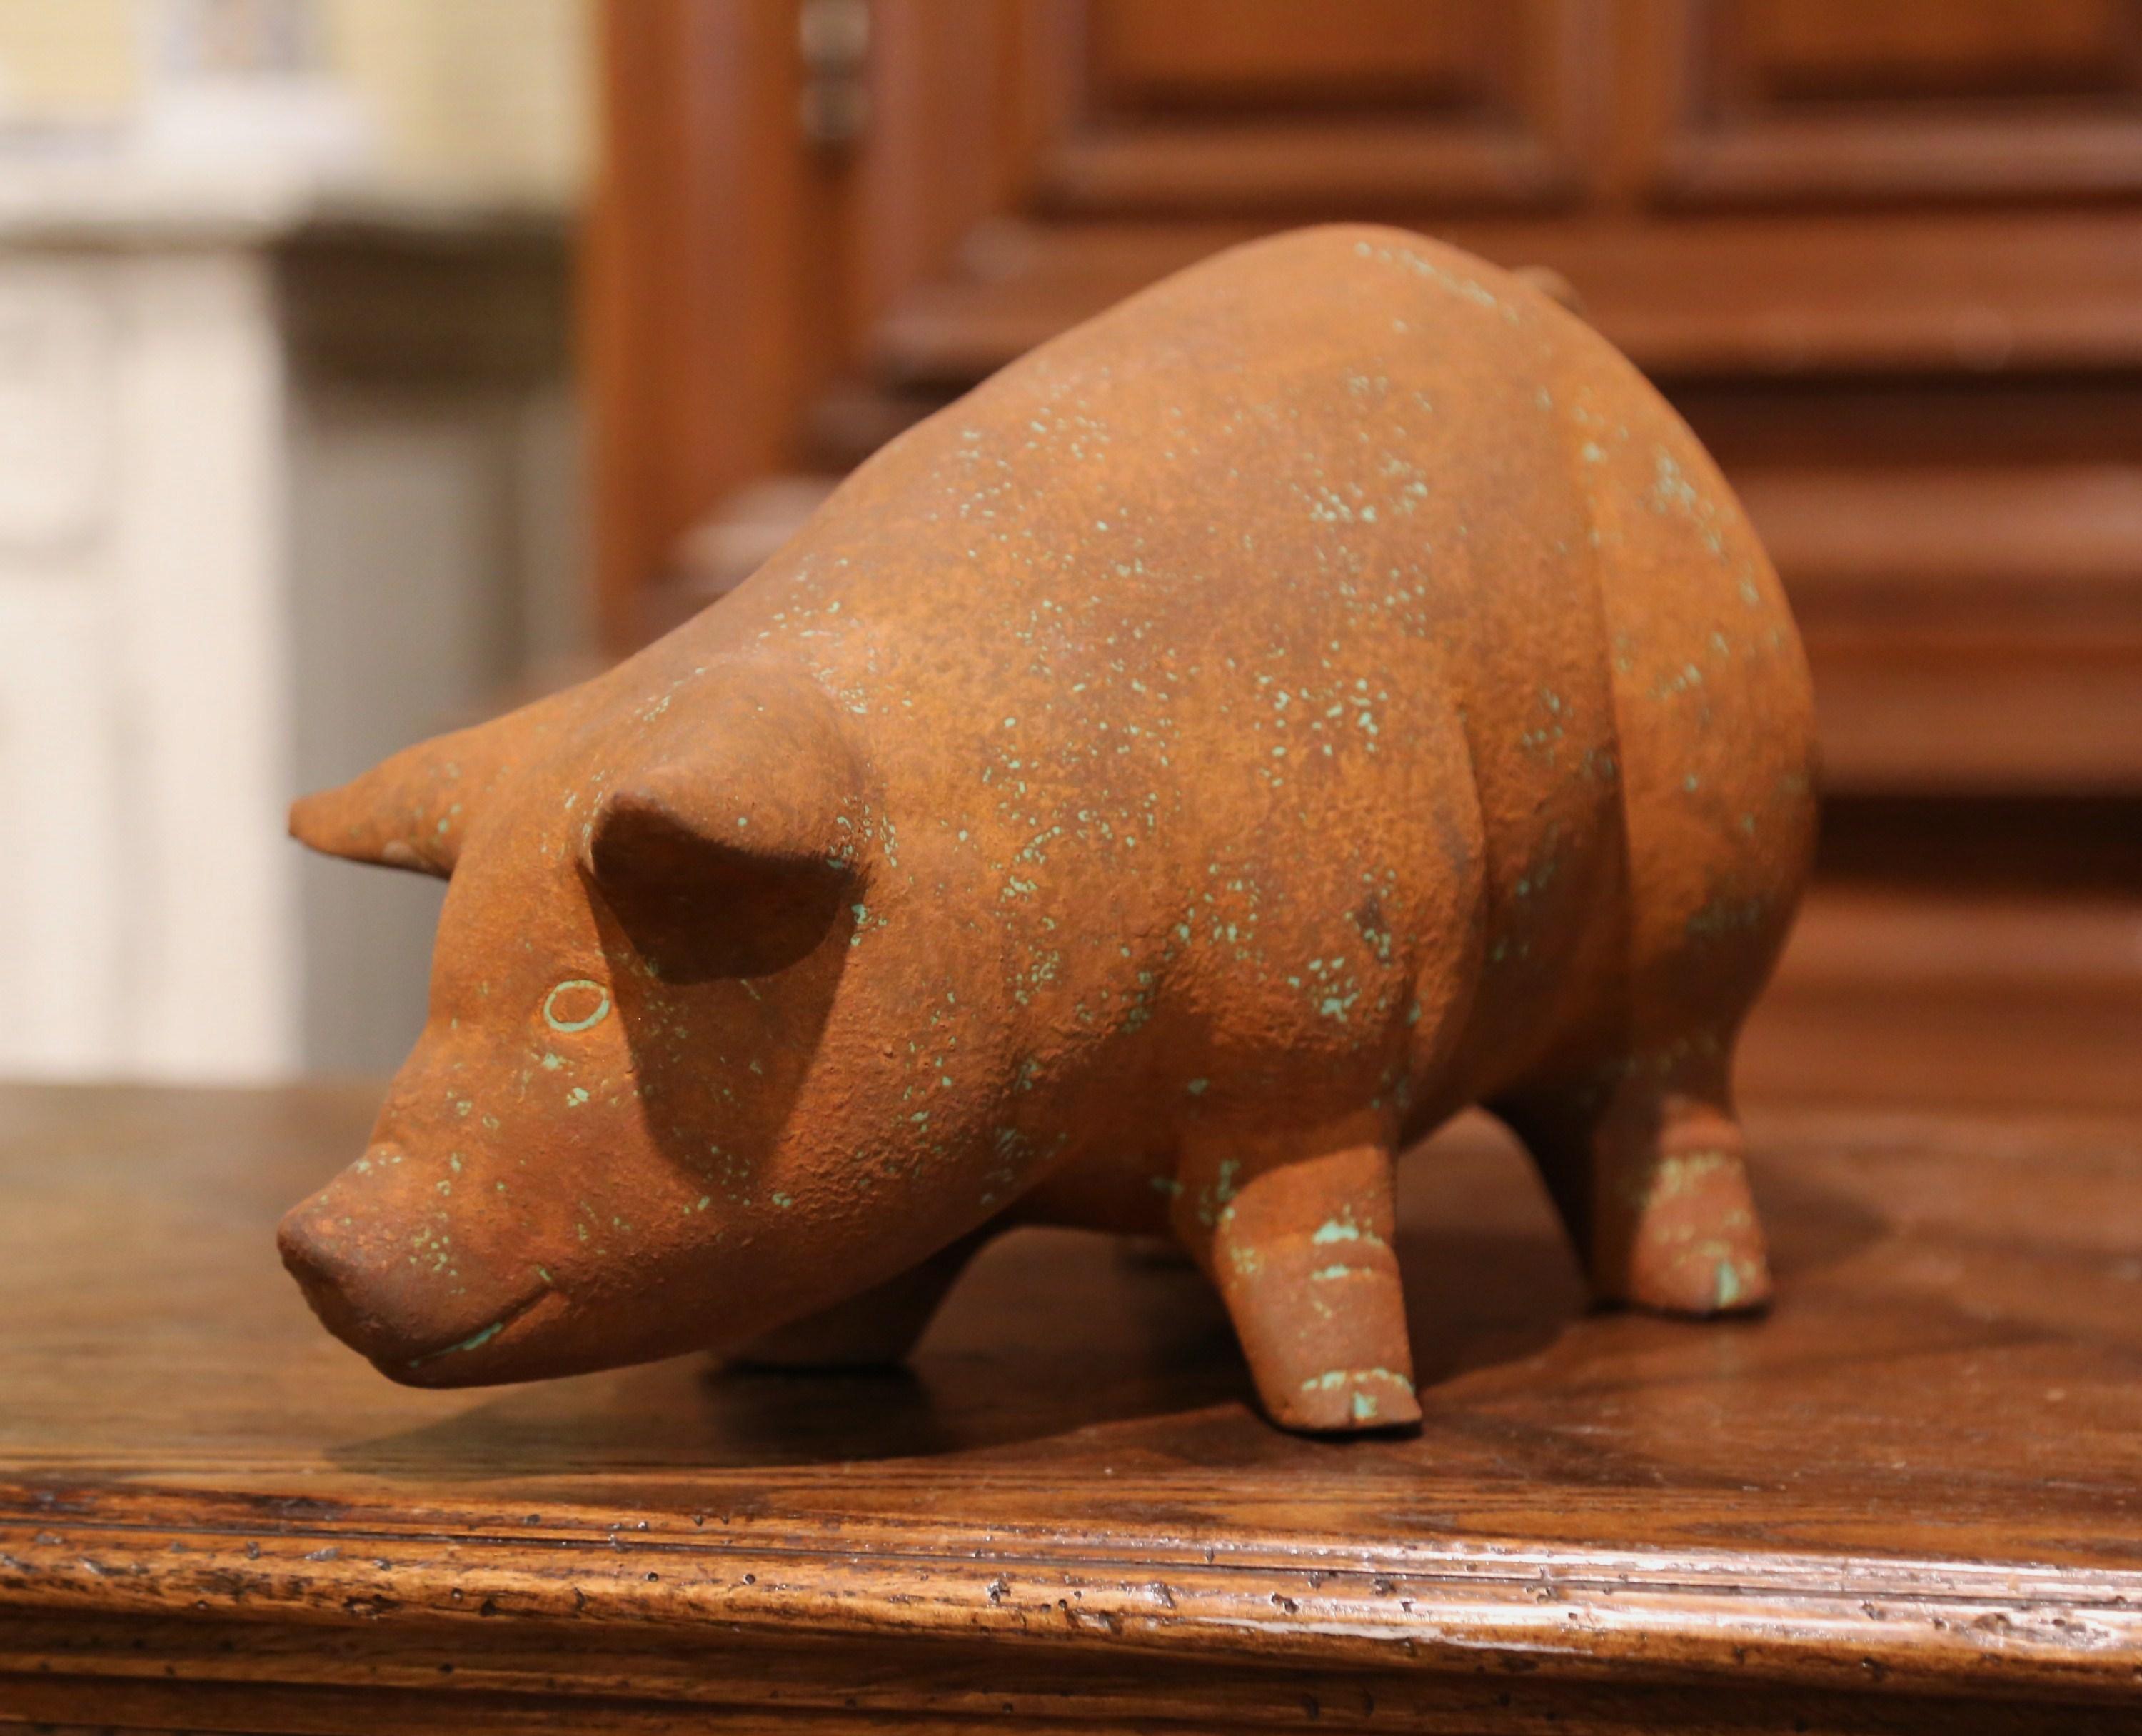 Decorate a kitchen counter or a patio with this cheerful pig sculpture. Crafted in France circa 2000, the earthenware figure depicts a fat hog standing and sniffing. The vintage pig is in excellent condition and adorns a nice patinated texture